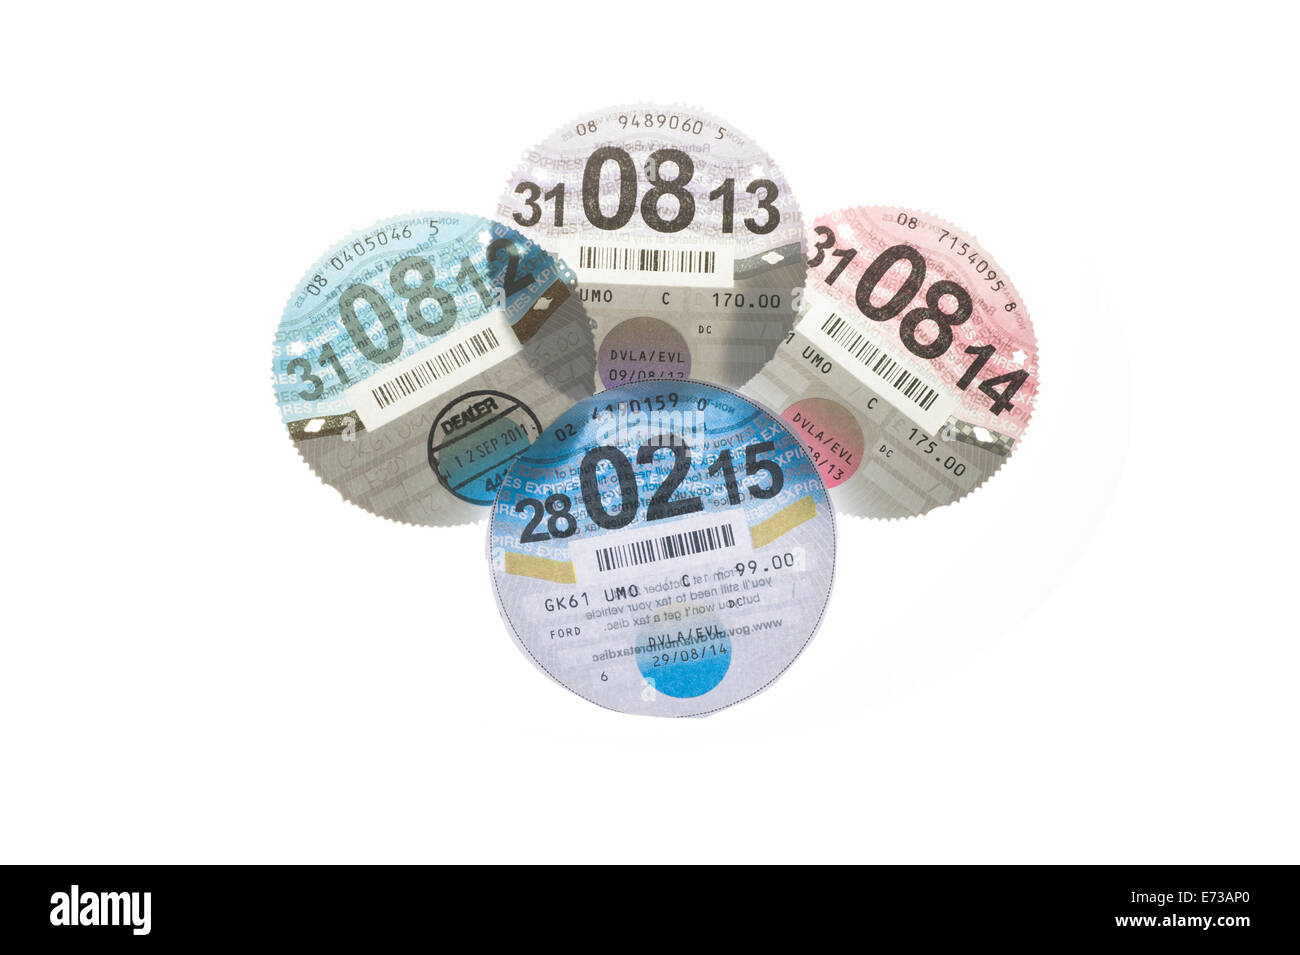 Four UK HMRC DVLC Car Tax discs backlit on a pure white background to show watermarks. Stock Photo